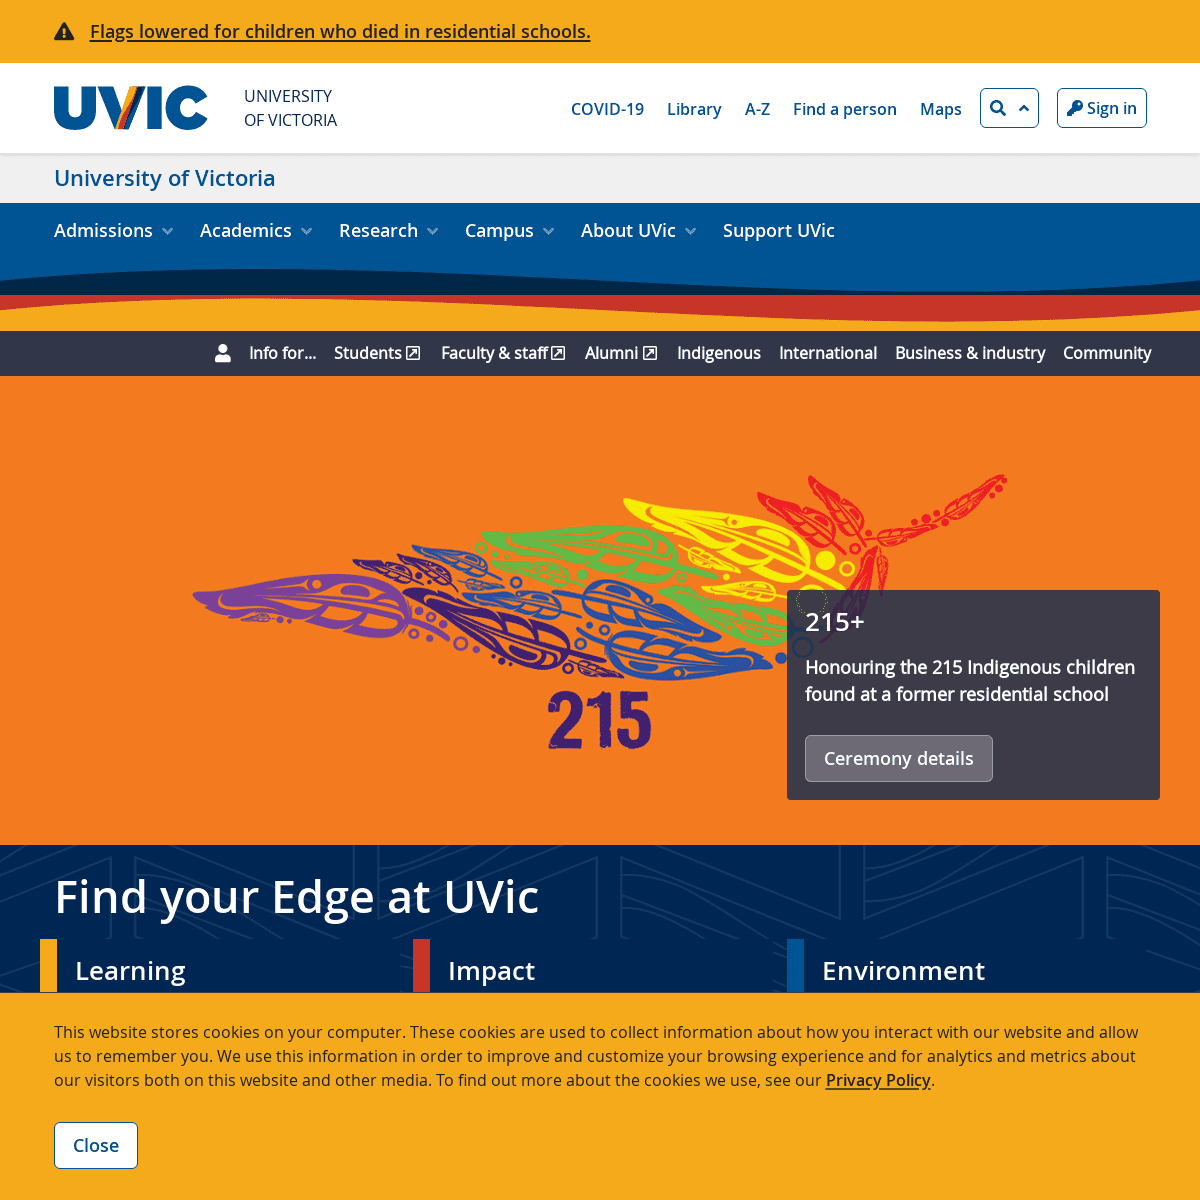 A complete backup of https://uvic.ca